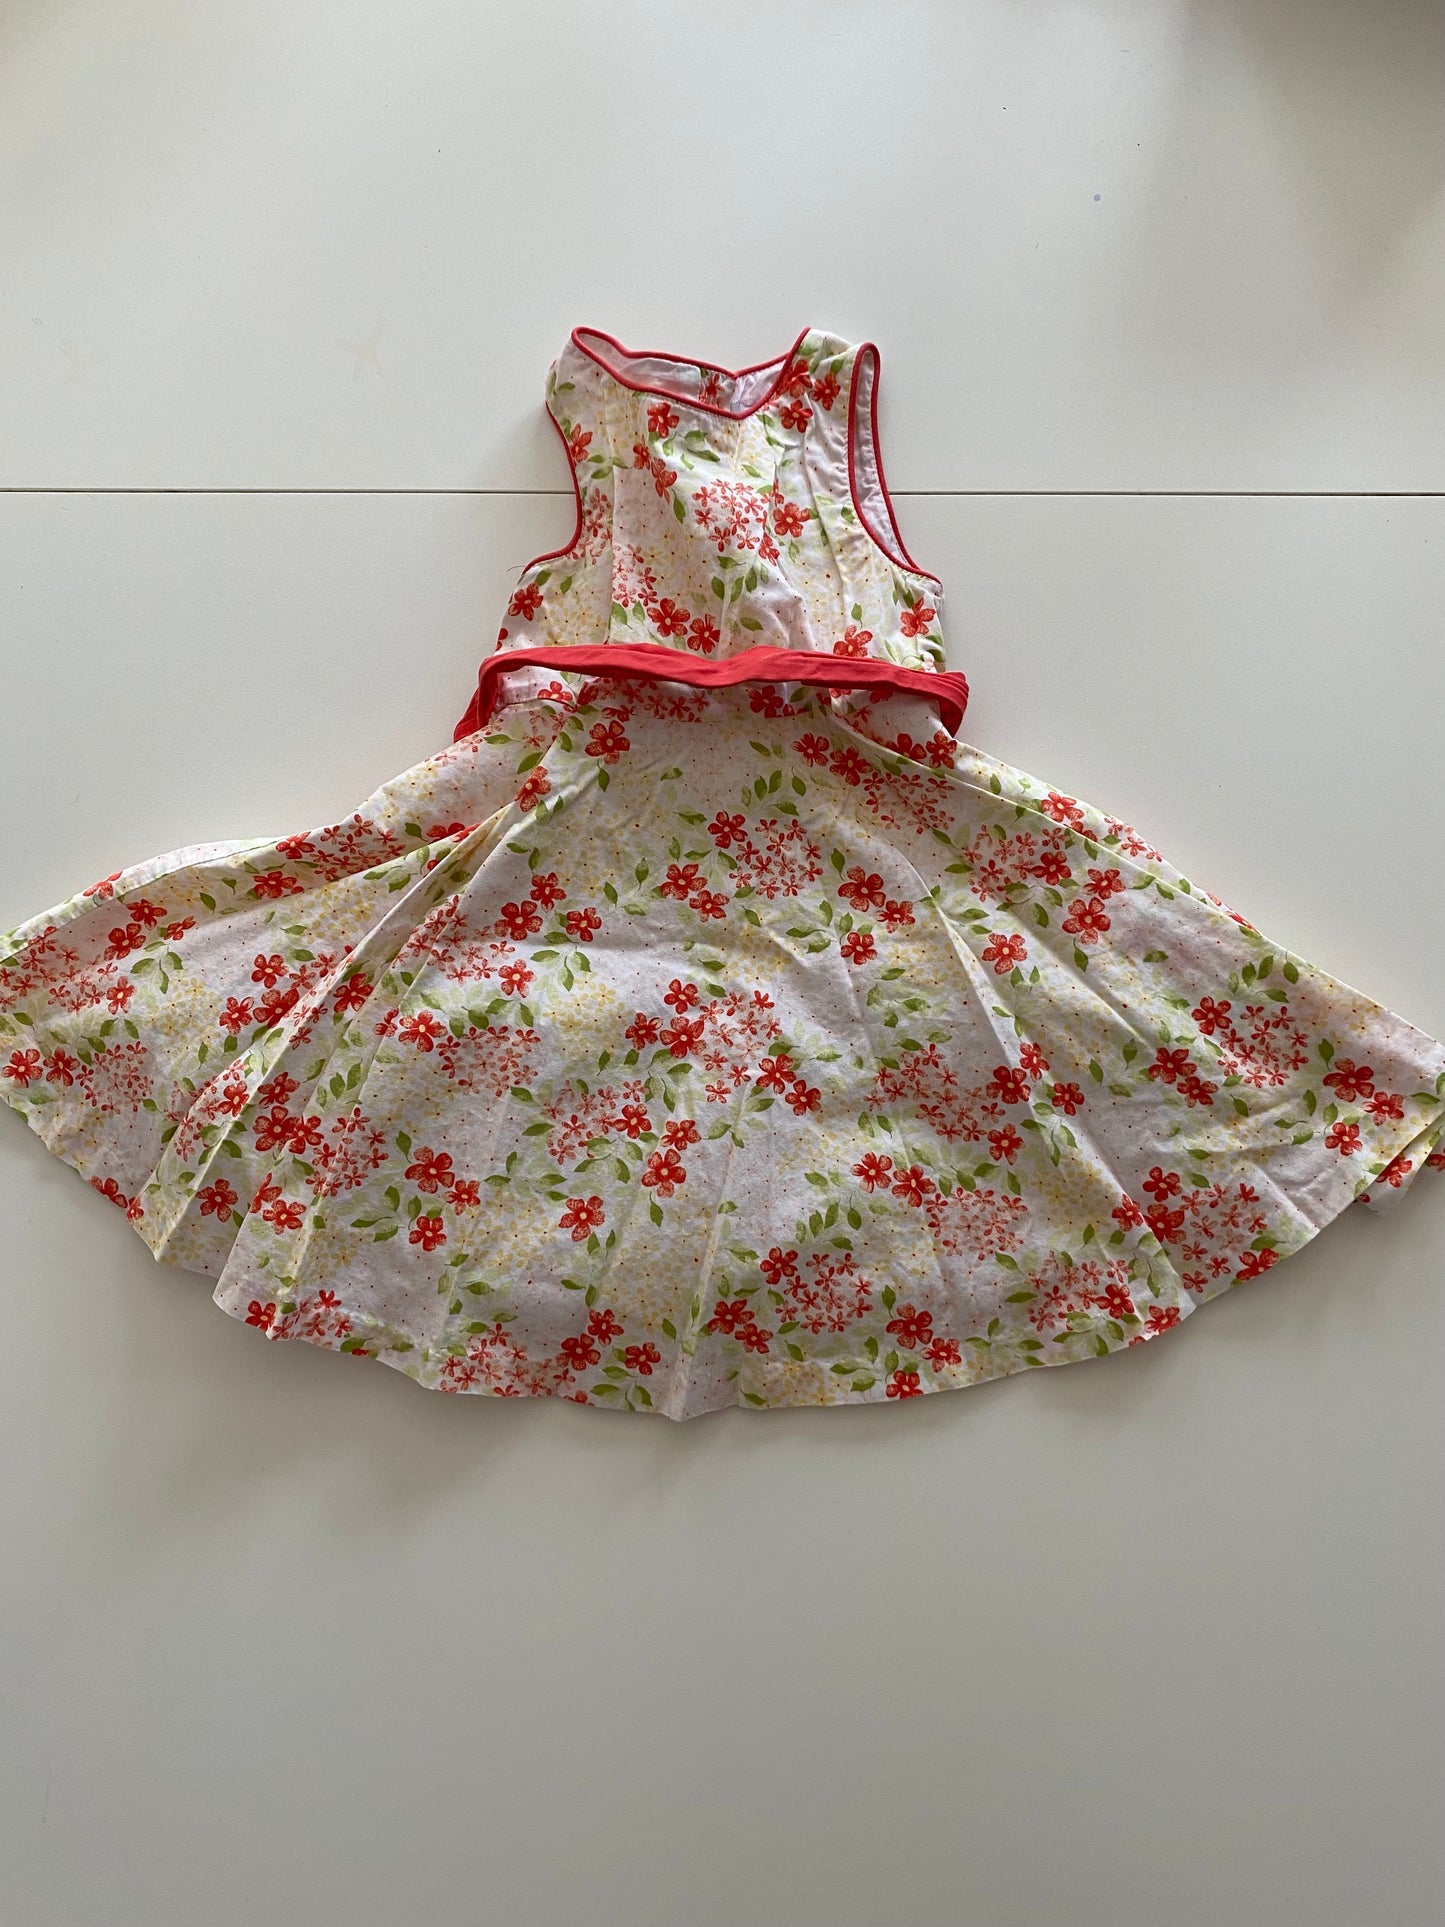 Polly & Friends red and yellow floral dress Girls 2T